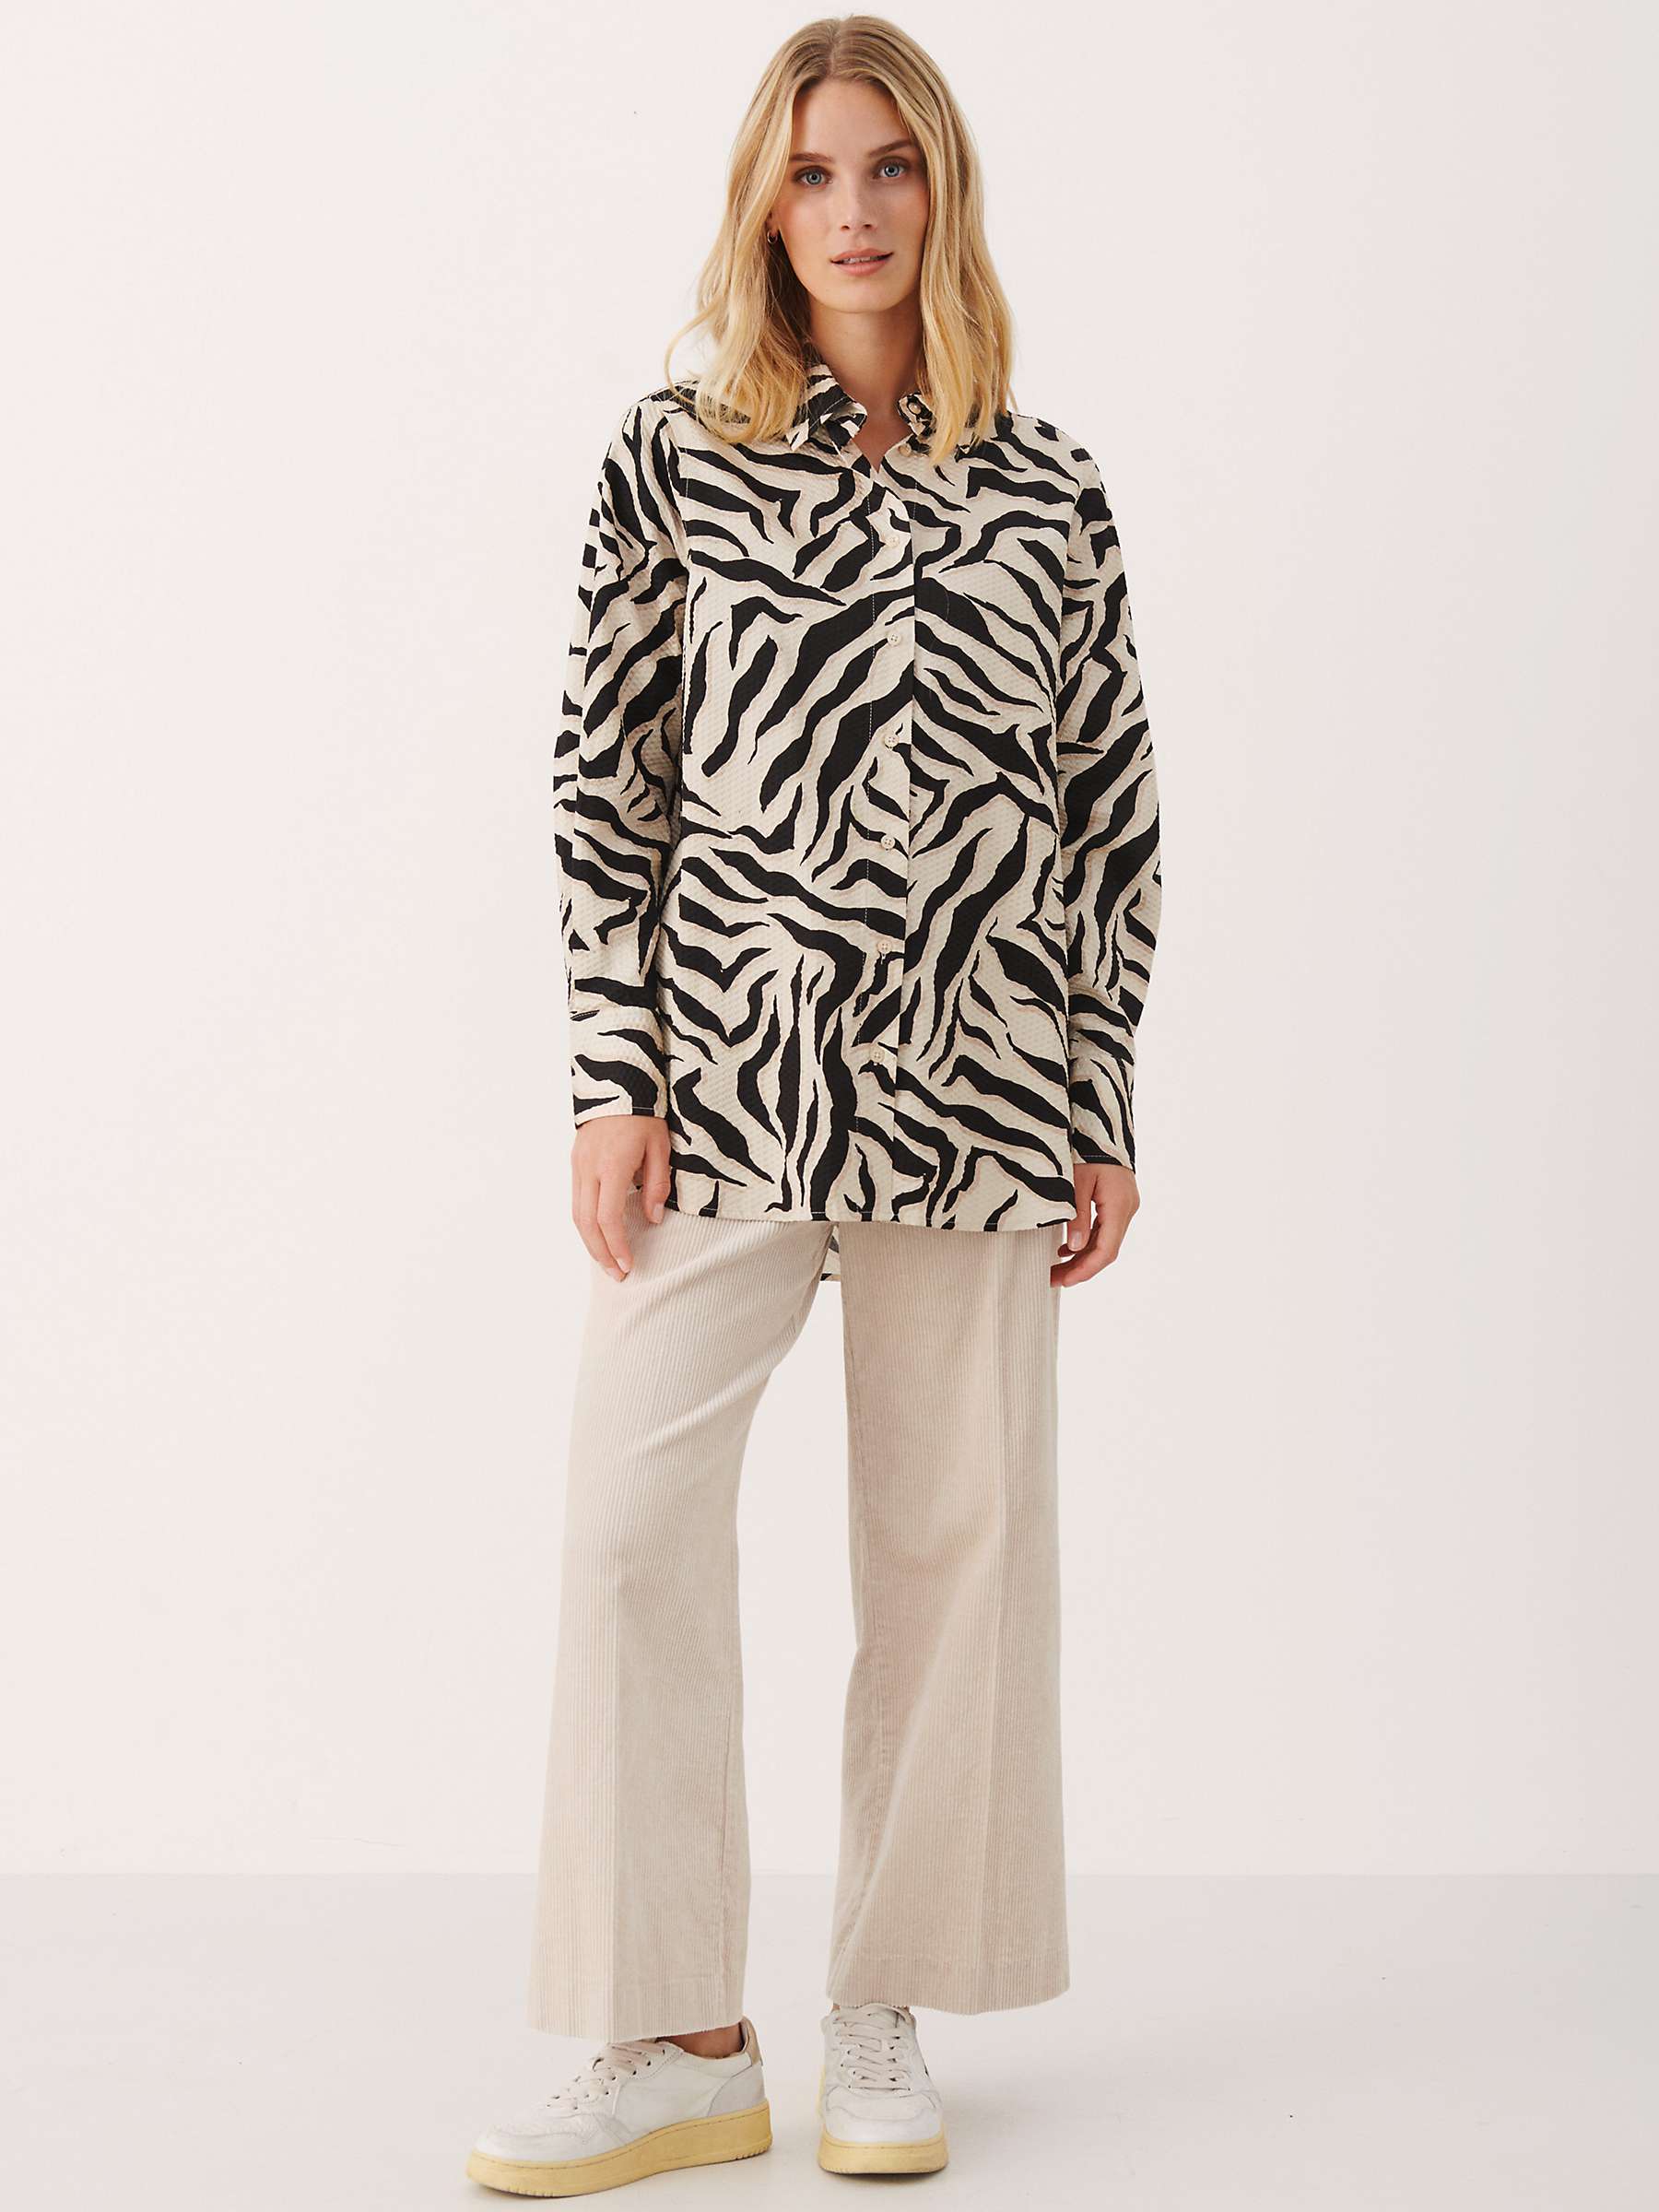 Buy Part Two Varla Relaxed Fit Shirt, Zebra Print Online at johnlewis.com